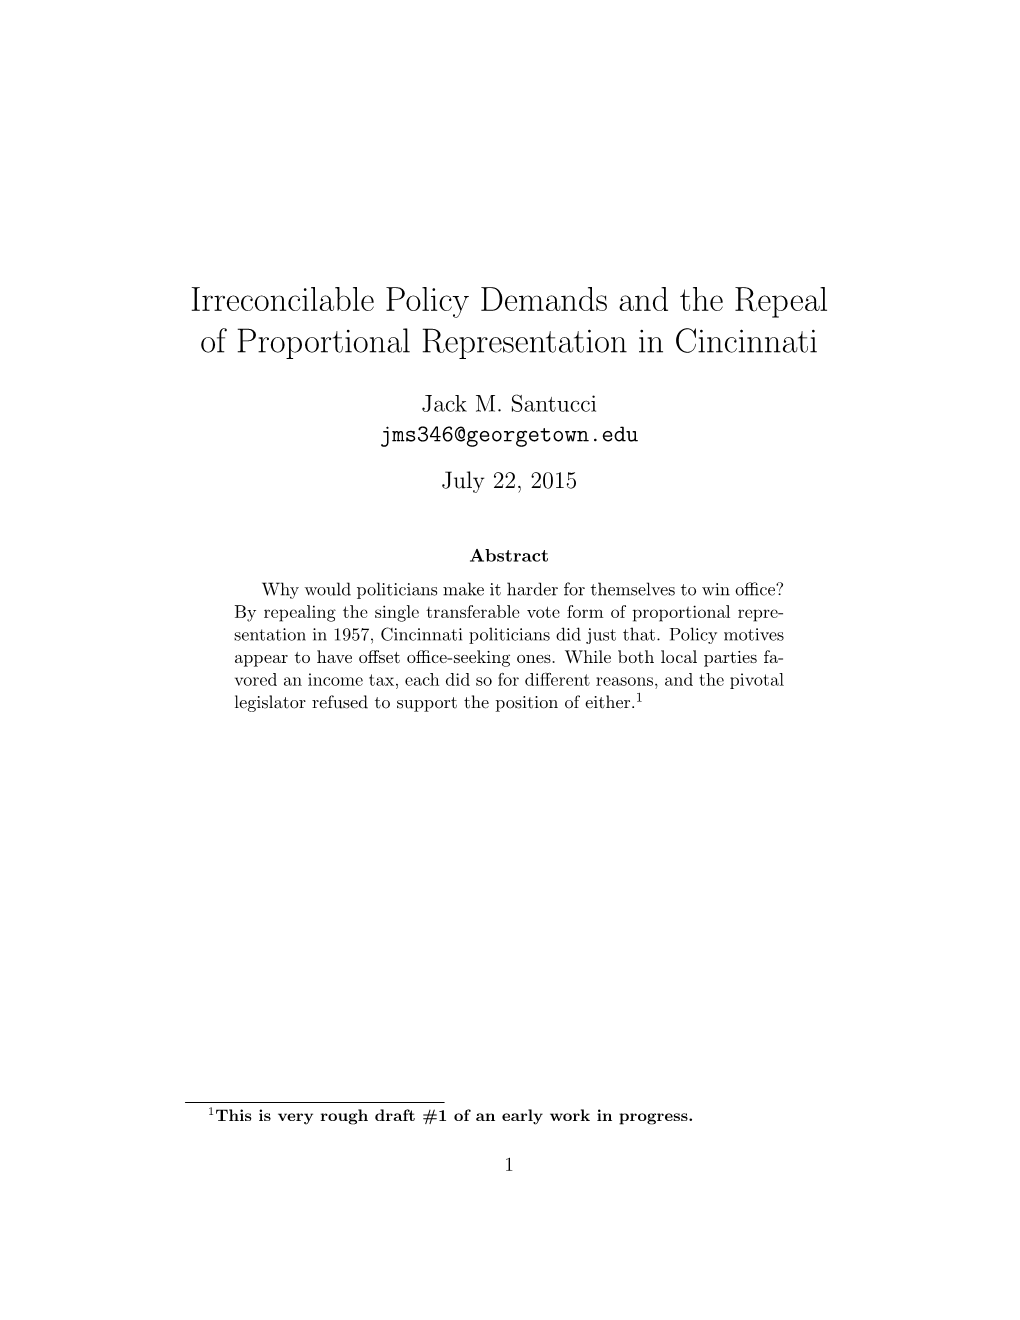 Irreconcilable Policy Demands and the Repeal of Proportional Representation in Cincinnati